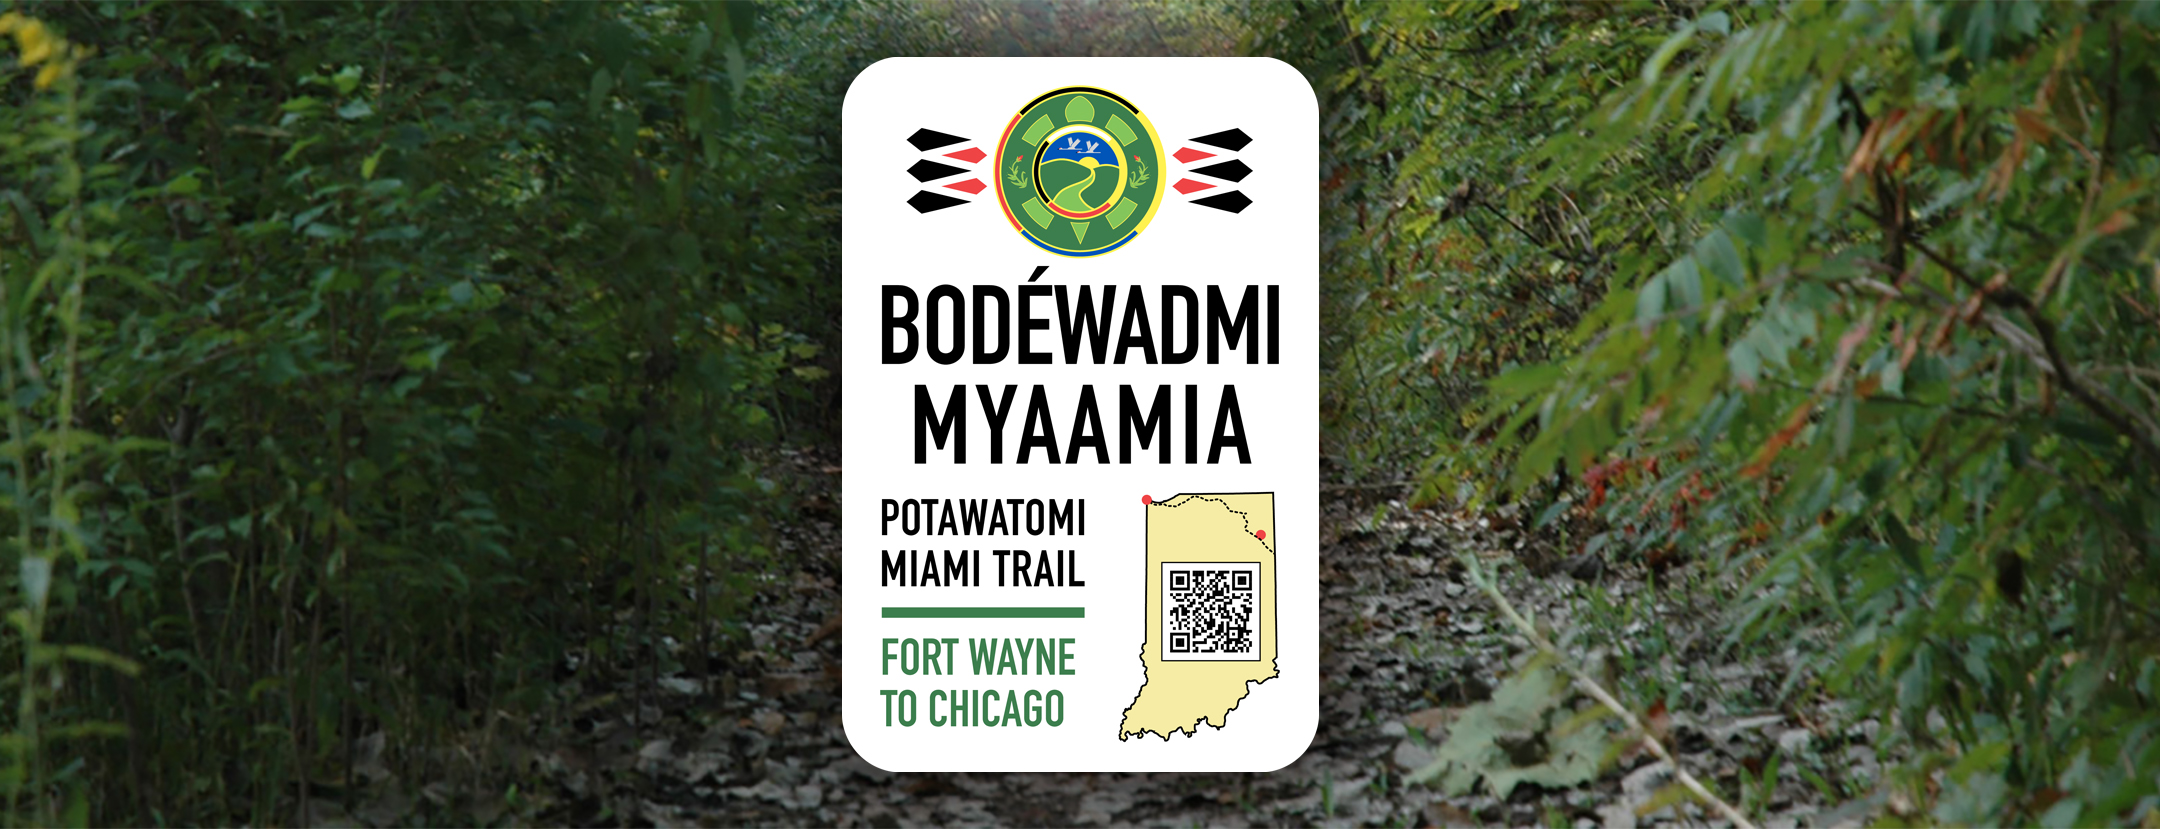 signage for the Potawatomi-Miami Trail marker at AMBS in Elkhart, Indiana, that will be unveiled on Sept. 29.